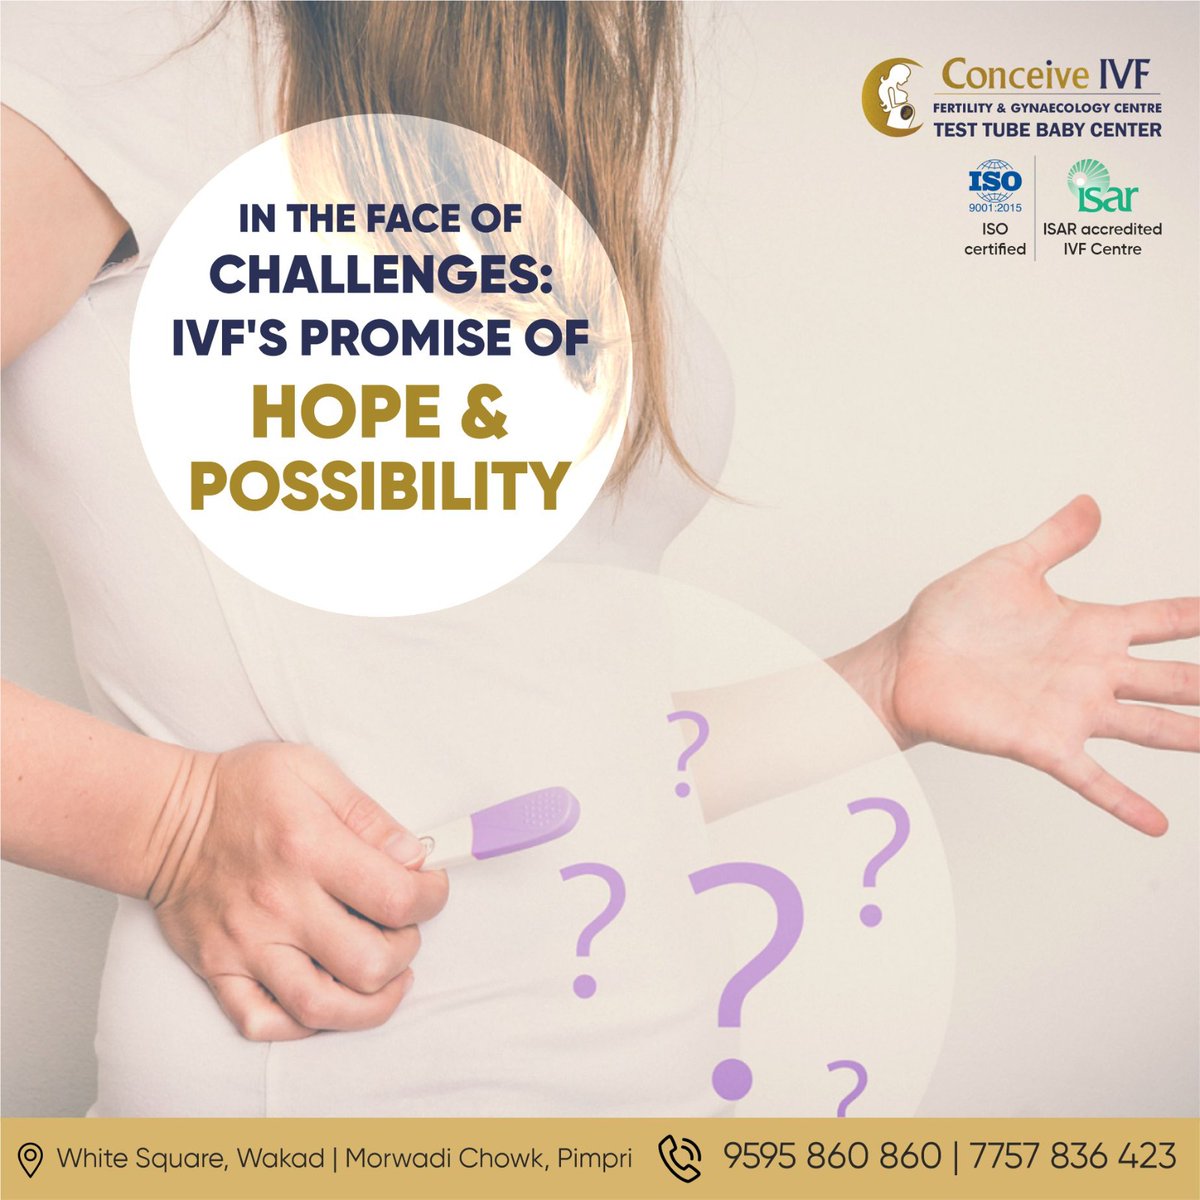 Accomplish your dream of becoming parents with us at Conceive IVF. We help couples achieve their dream of becoming parents and starting a family. 
Call us now at 9595860860 or 7757836423.

#ConceiveIVF #InfertilitySupport #punetimesmirror #GynecologicalHealth #ivf #fertility